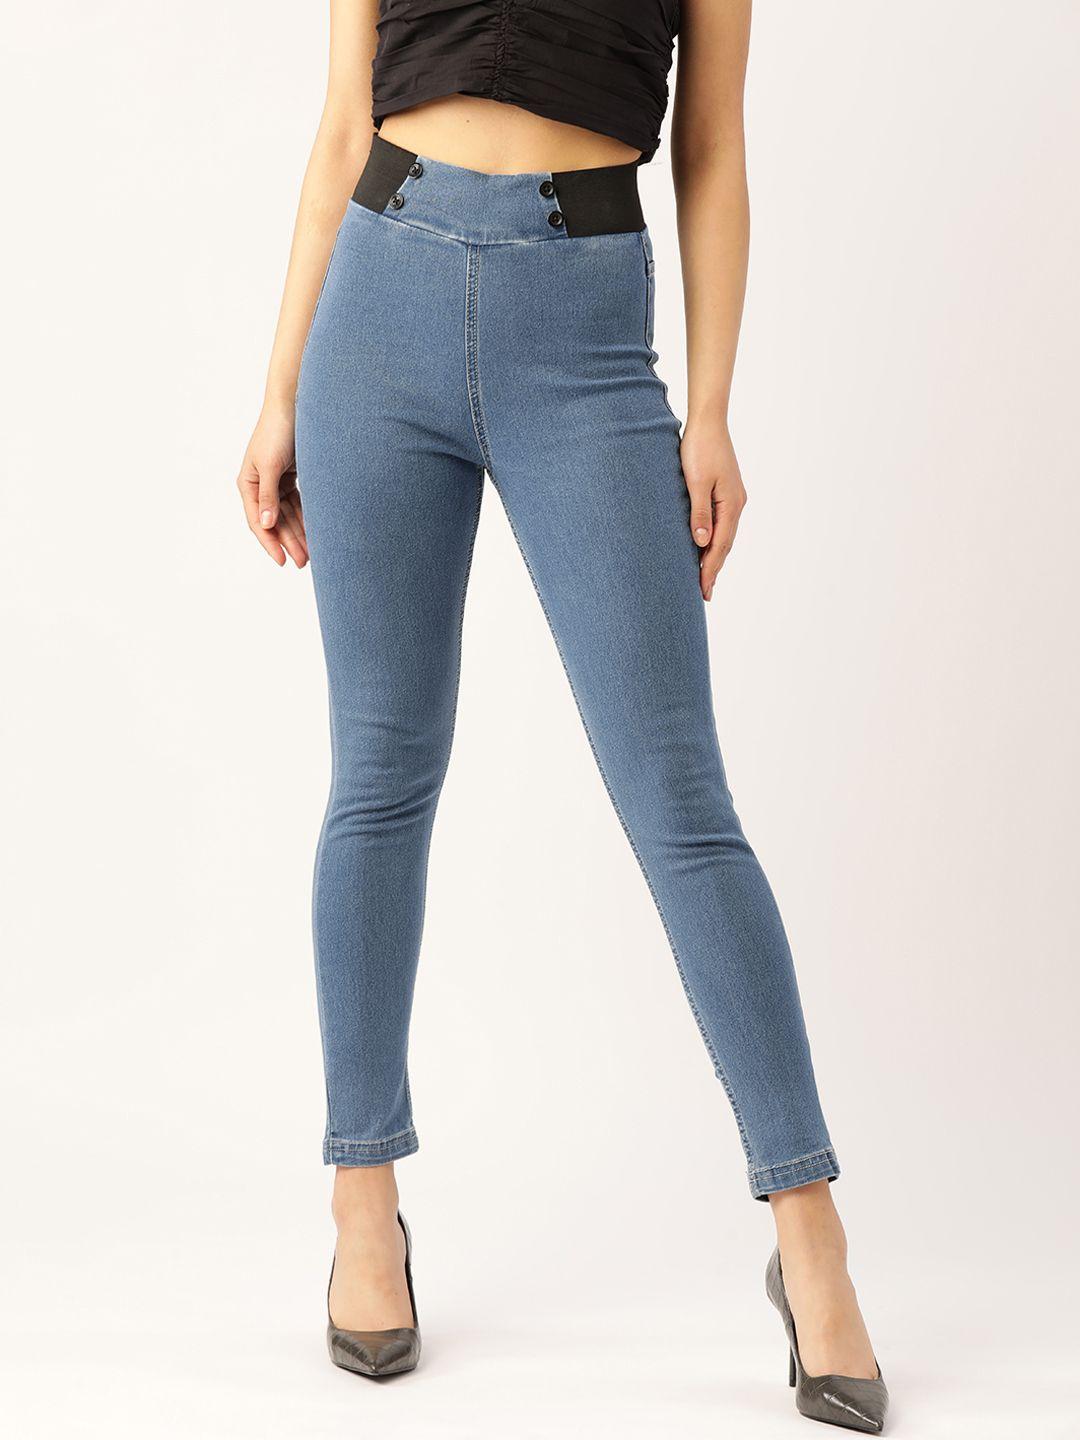 dressberry-women-blue-high-rise-ankle-length-solid-jeggings